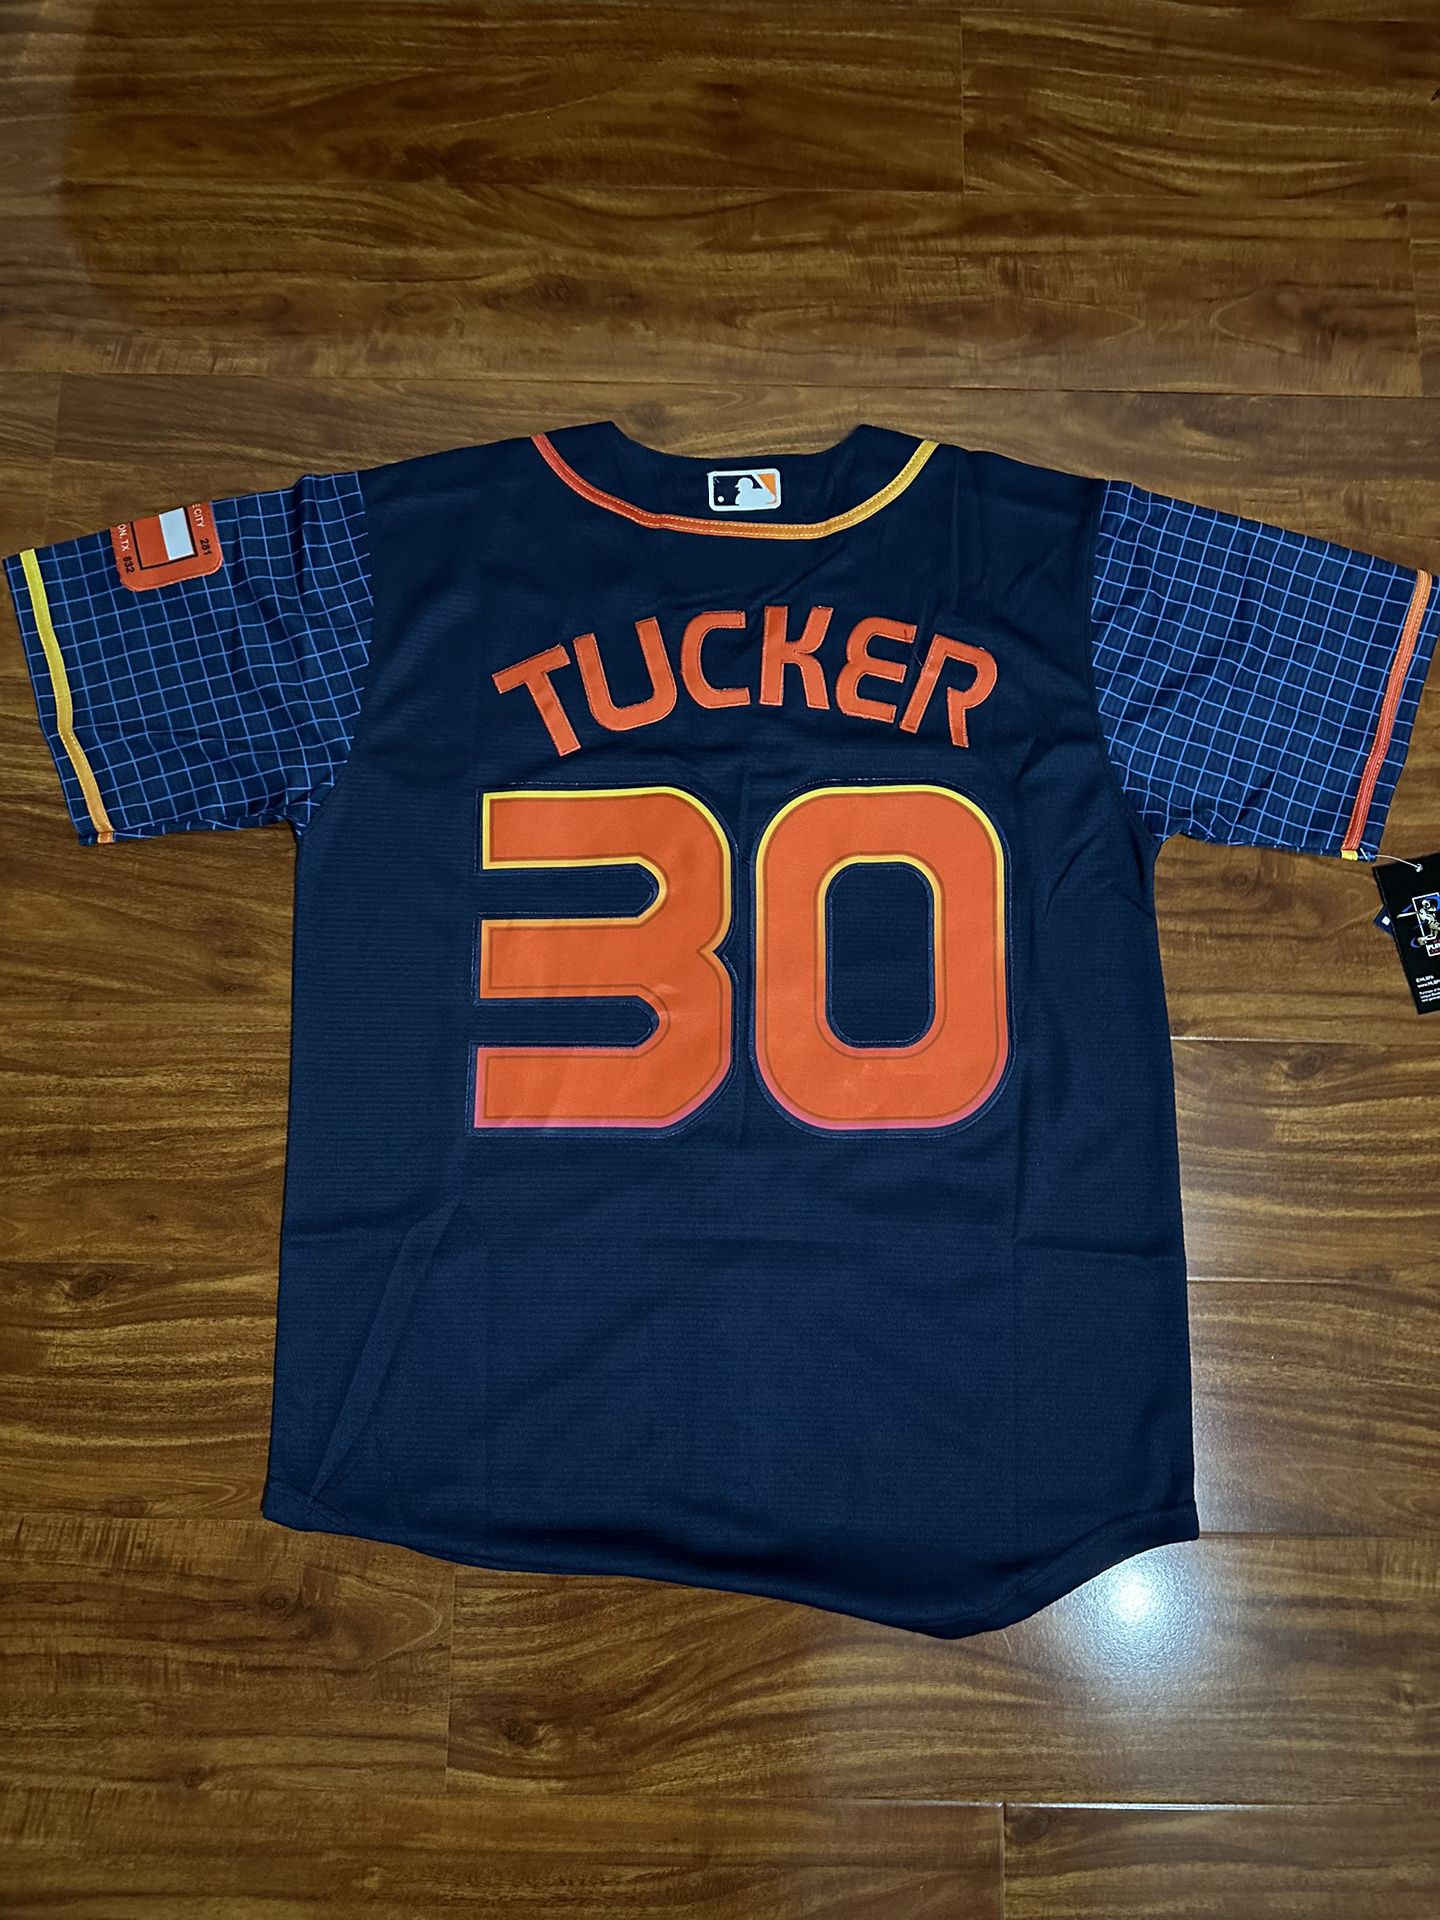 Tucker Space City Astro Jersey for Sale in Conroe, TX - OfferUp